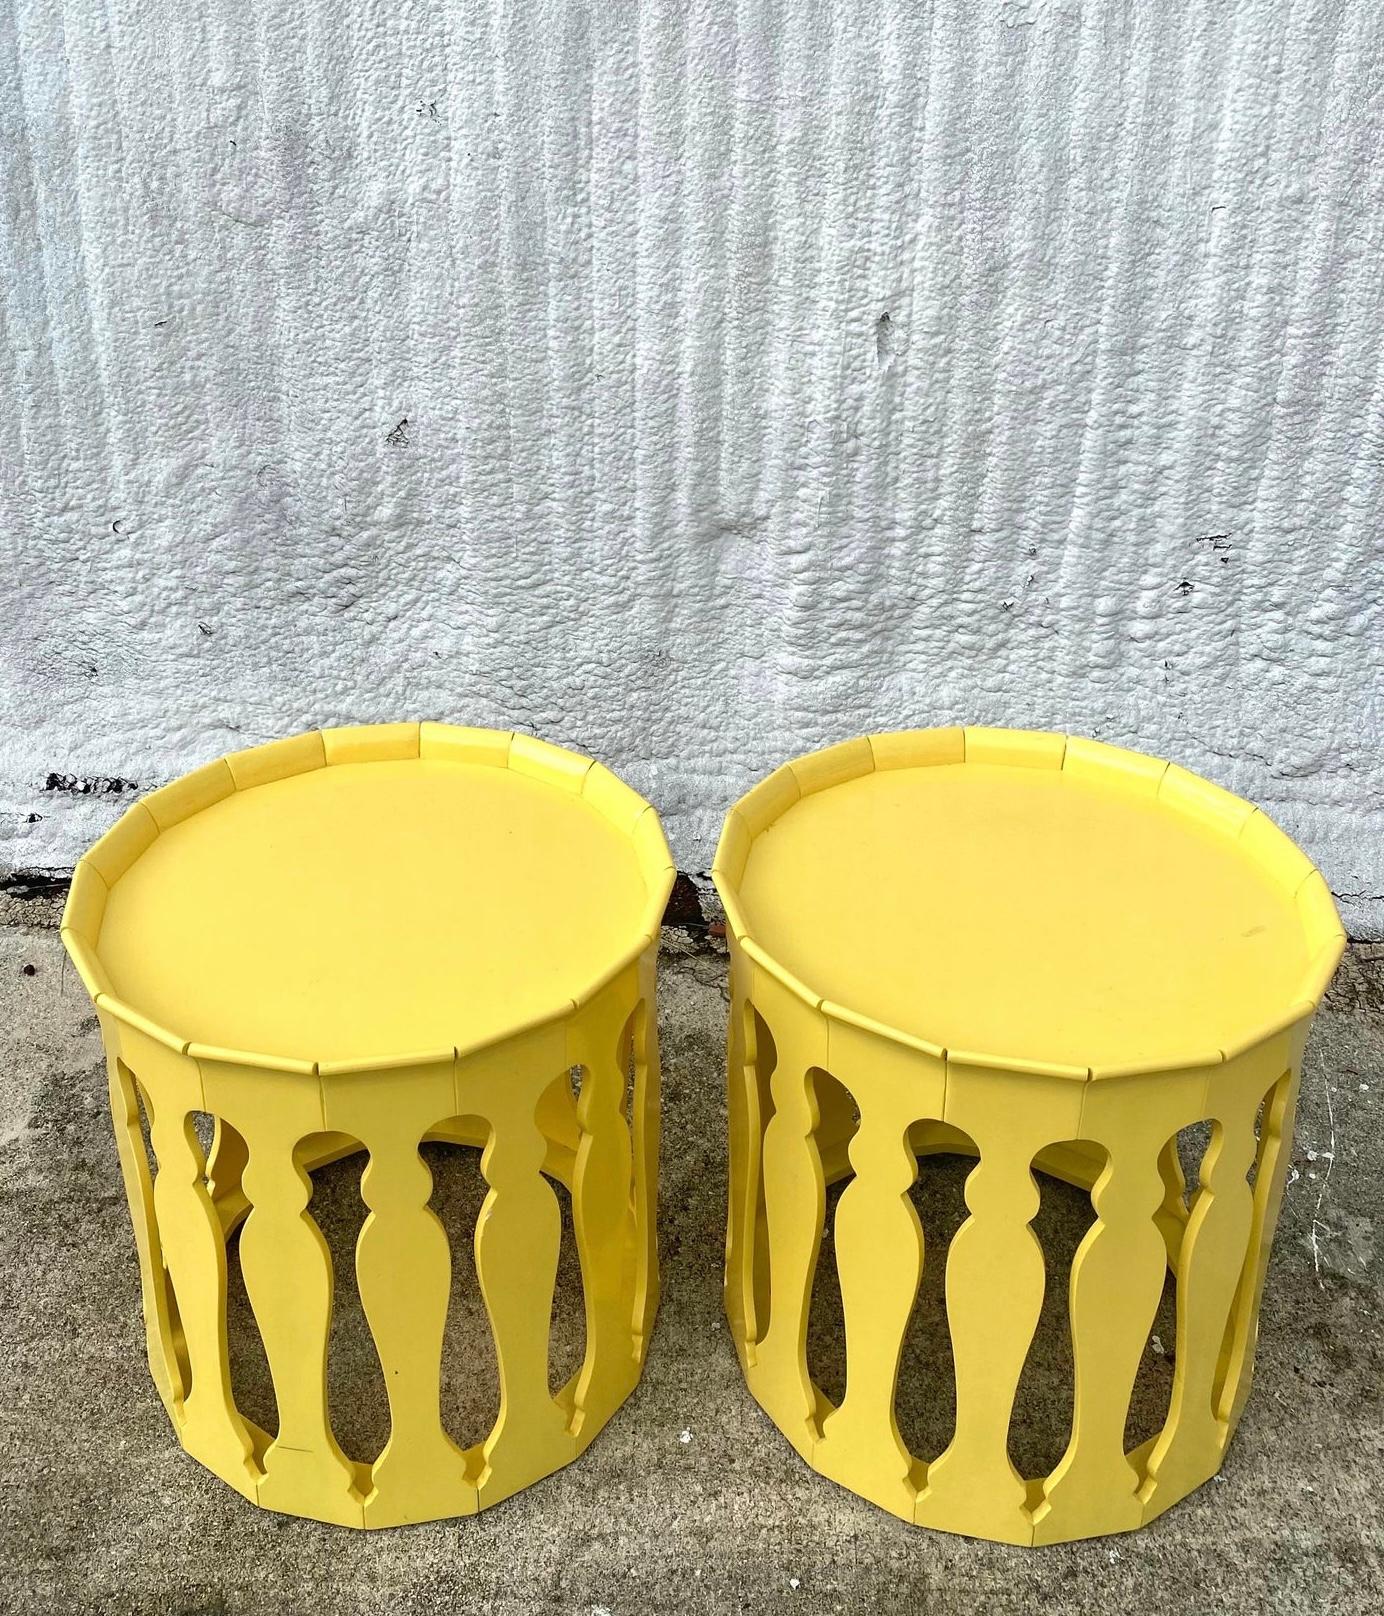 Incredible pair of Johnathan Charles side tables. The iconic “Yellow Raincoat” design. A chic Moorish design with a brilliant yellow lacquer finish. Acquired from a Palm Beach estate.